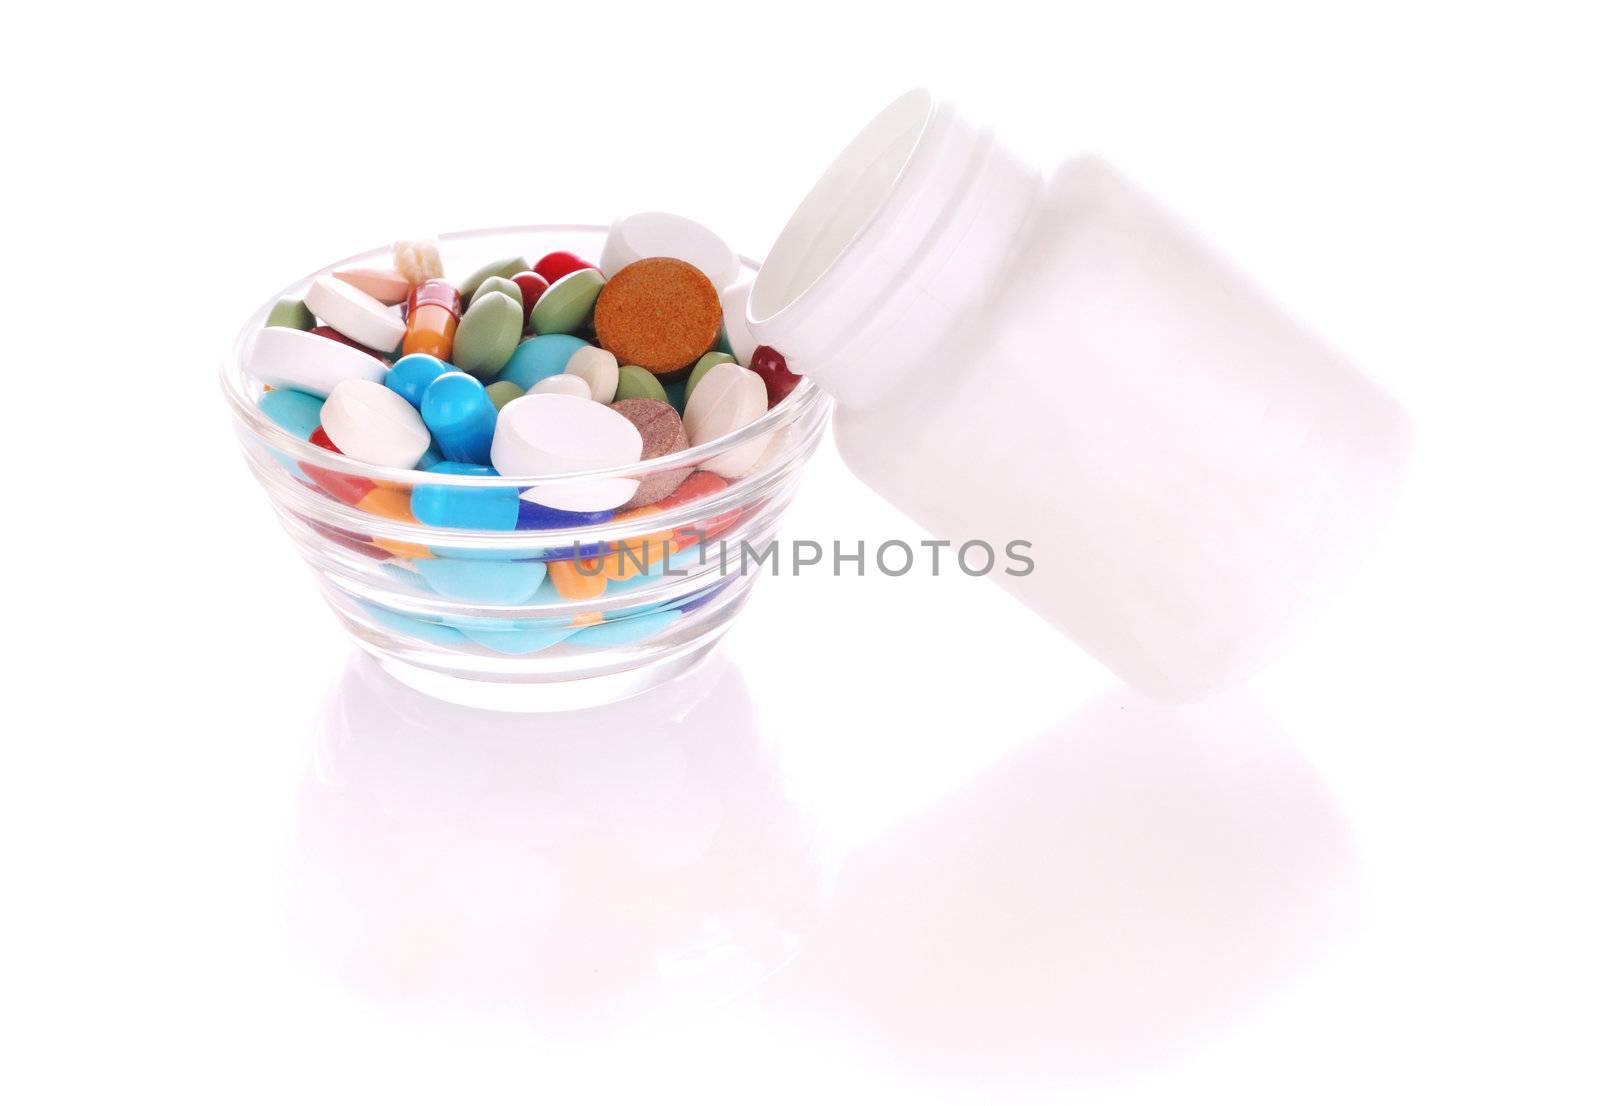 Transparent saucer and white bottle with many-colored pills